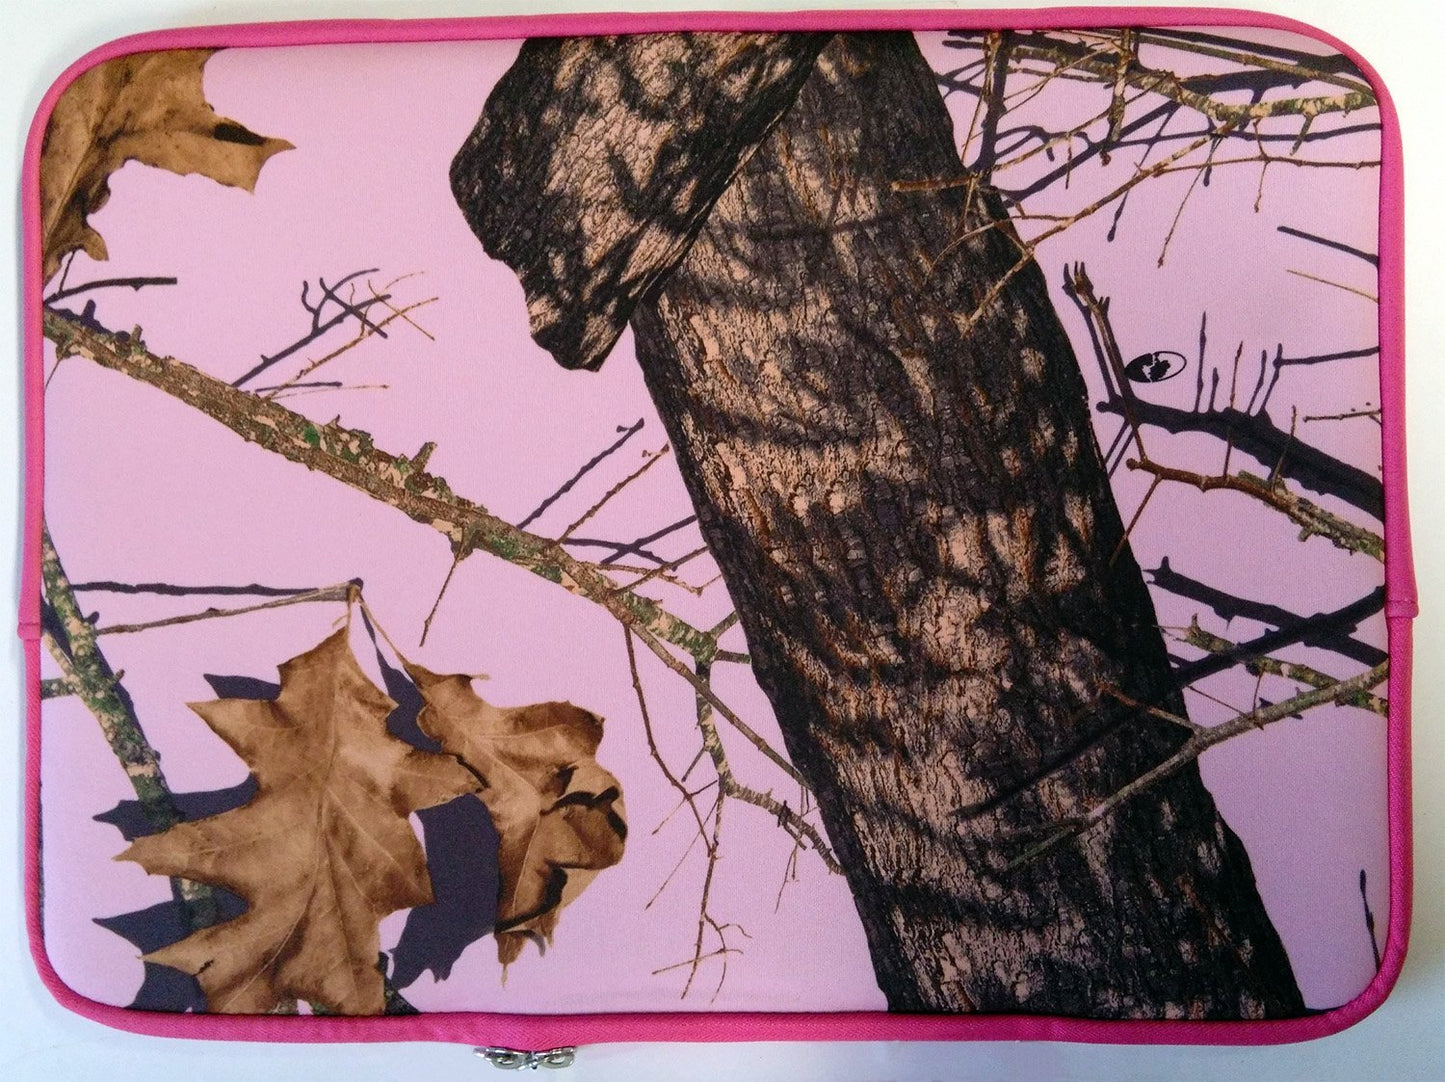 MOSSY OAK 15.6" PINK CAMO LAPTOP SLEEVE protector case backpack